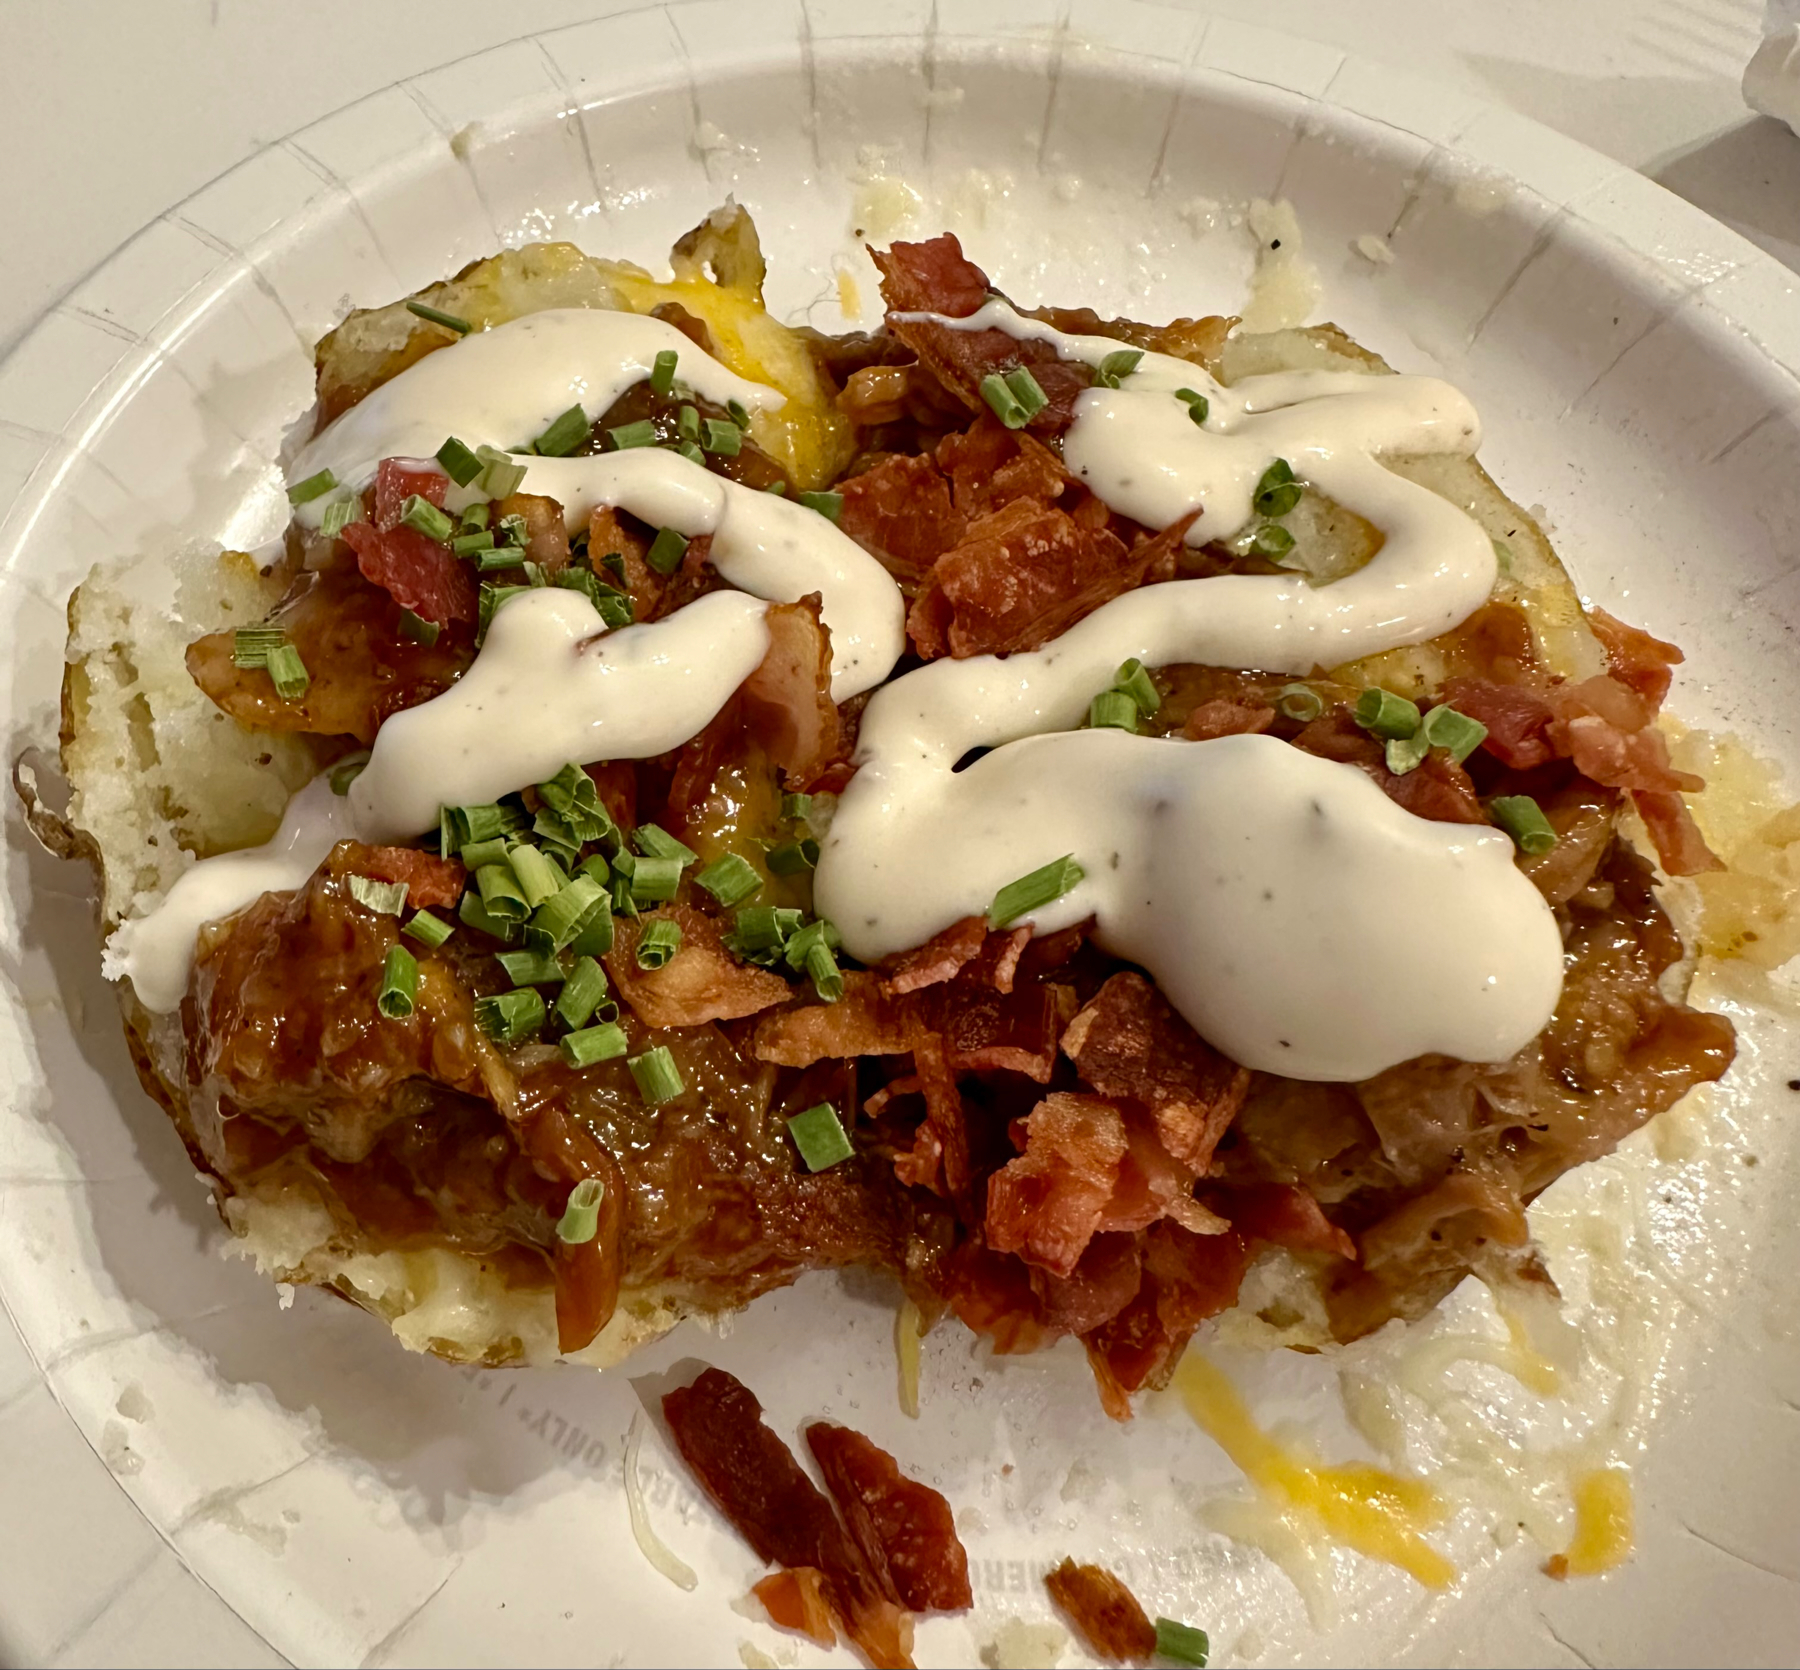 A loaded baked potato with toppings including shredded cheese, bacon bits, chopped green onions, and a drizzle of white sauce on a white disposable plate.